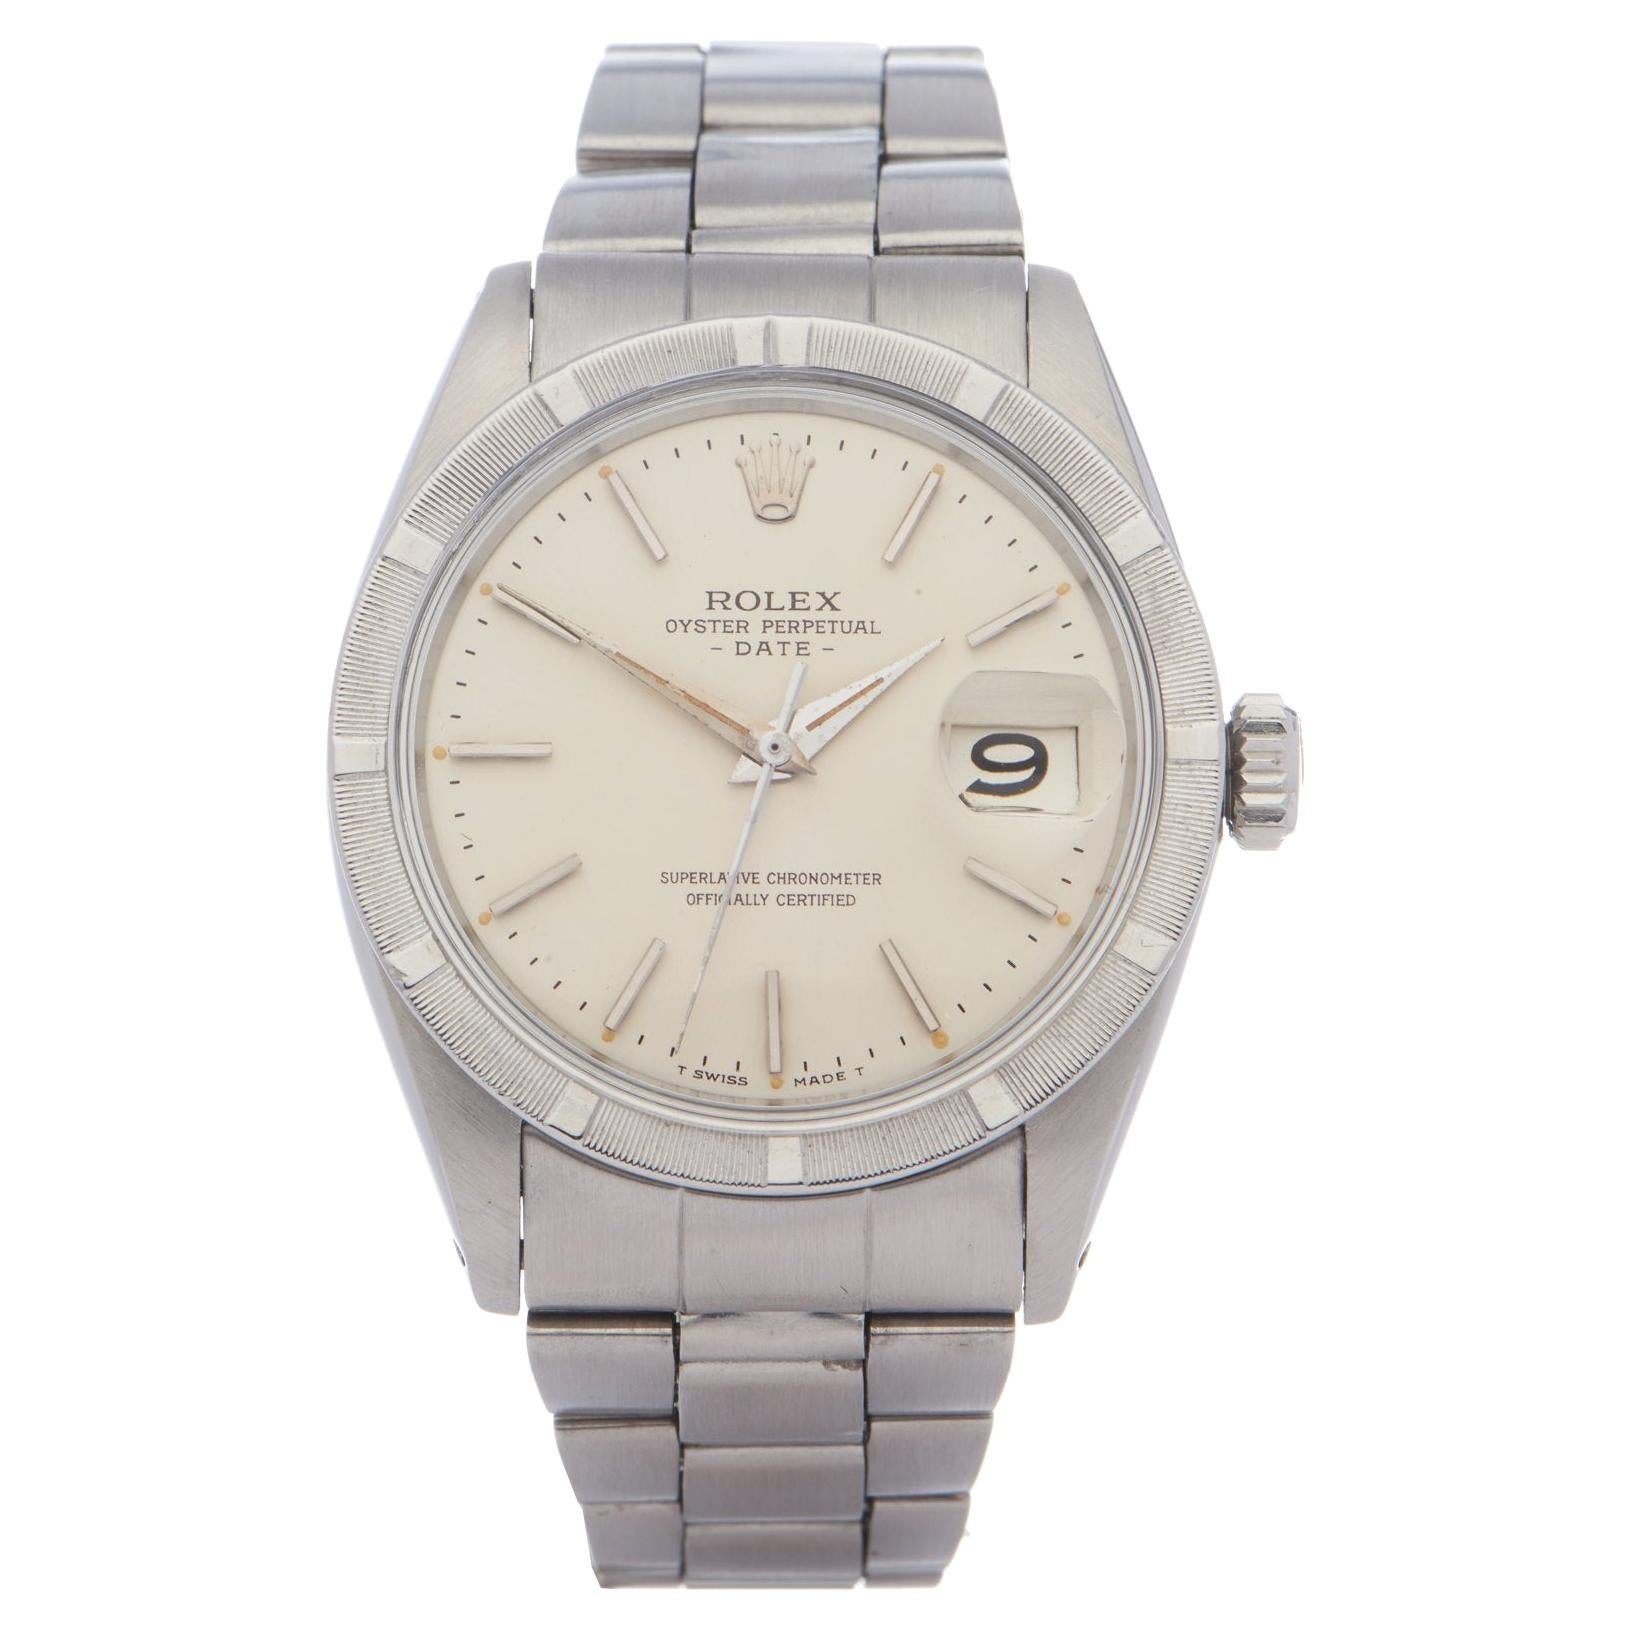 Rolex Oyster Perpetual Date 0 1501 Unisex Stainless Steel 0 Watch